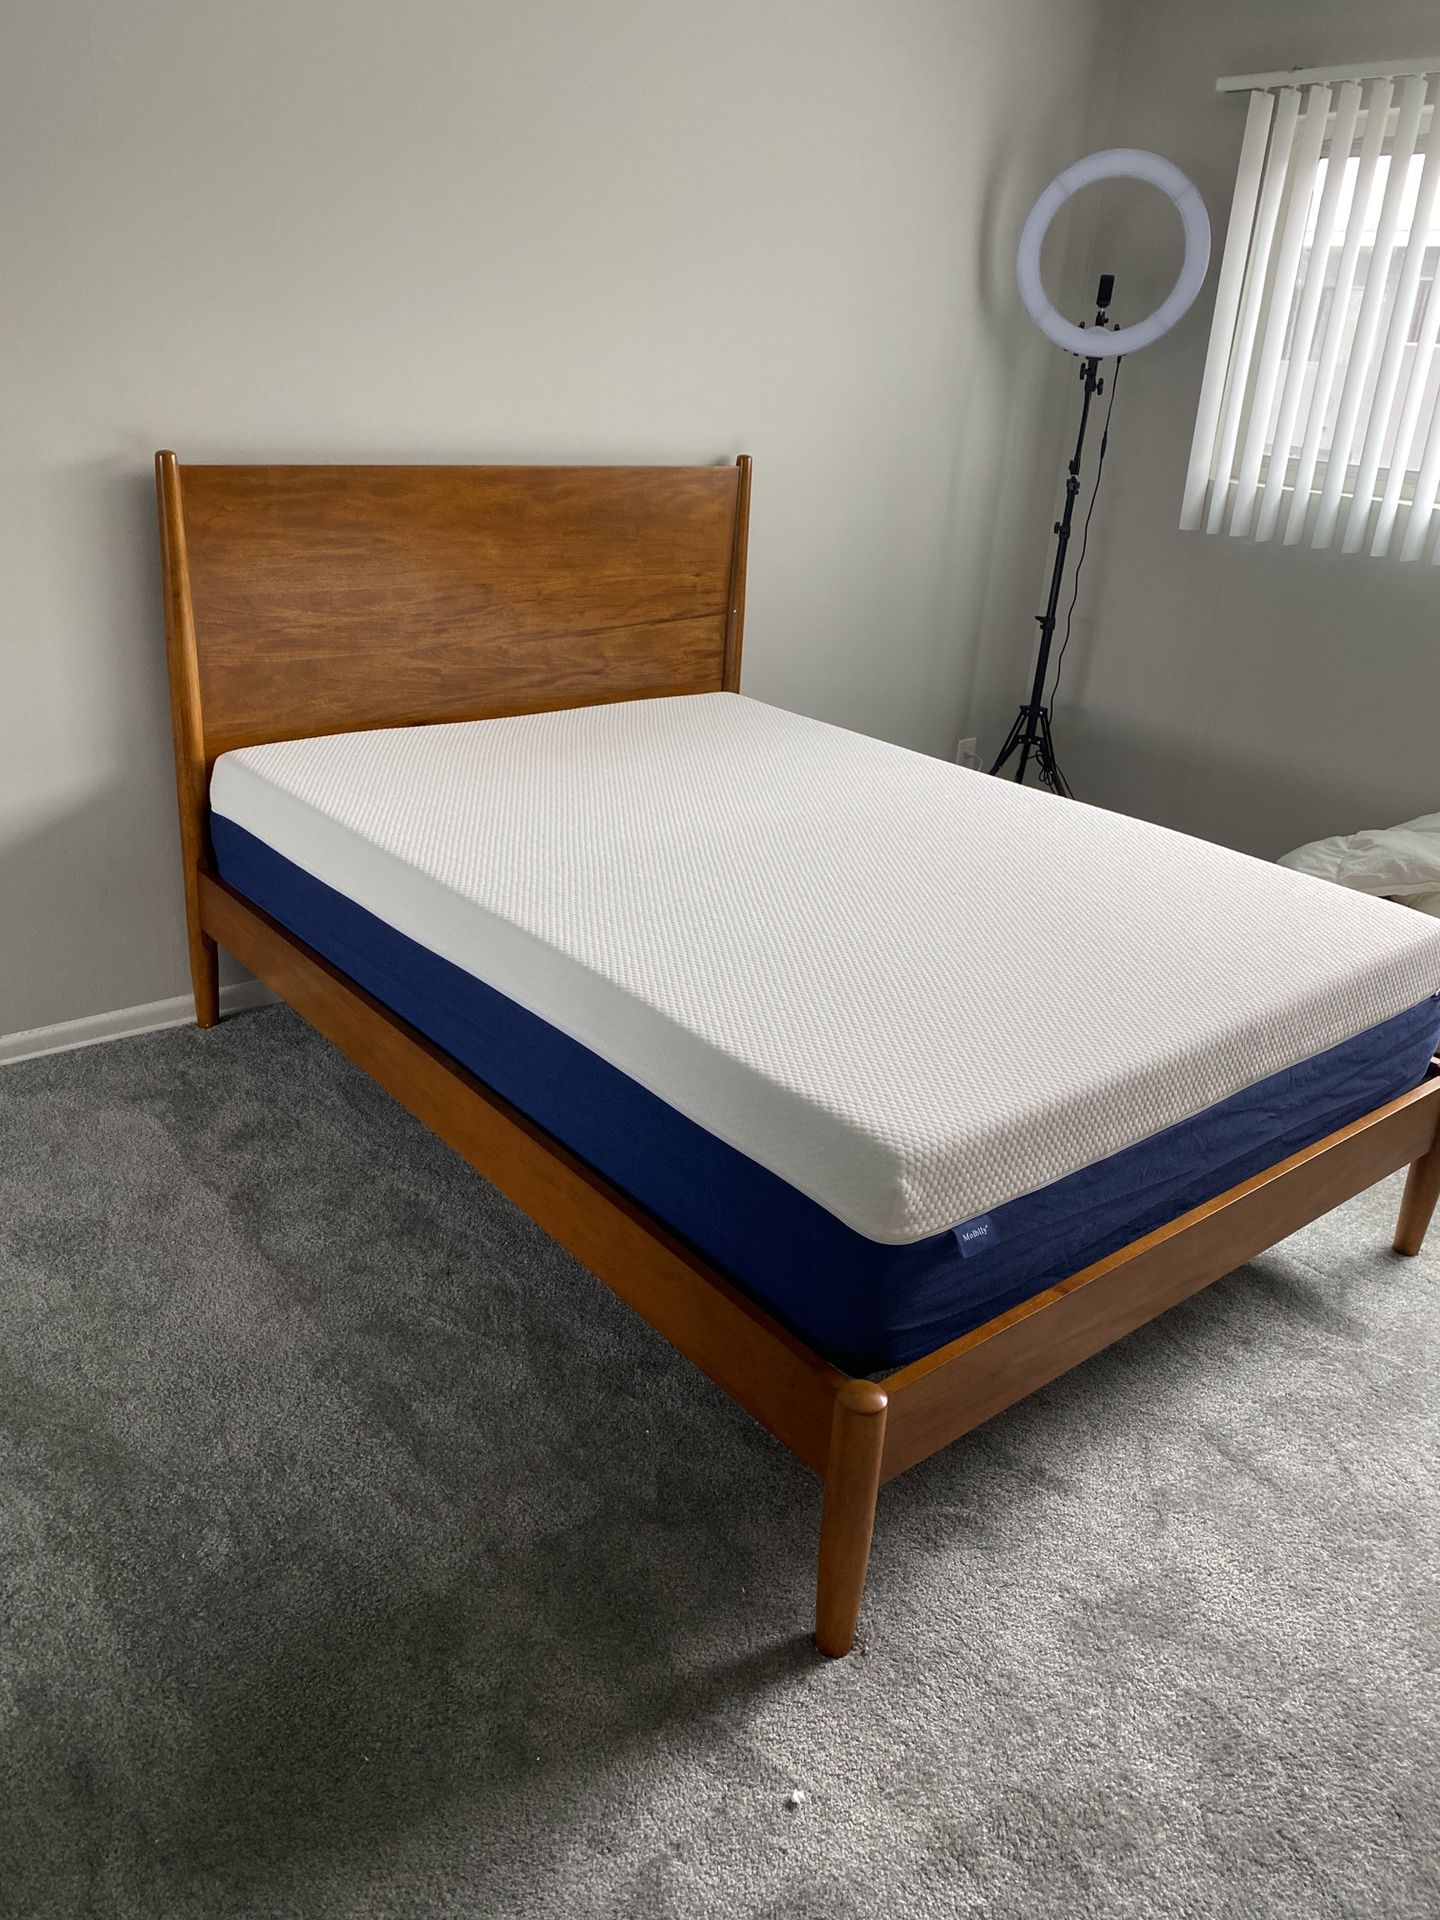 Alton Cherry Bed Frame For In Los, Bed Frames Los Angeles